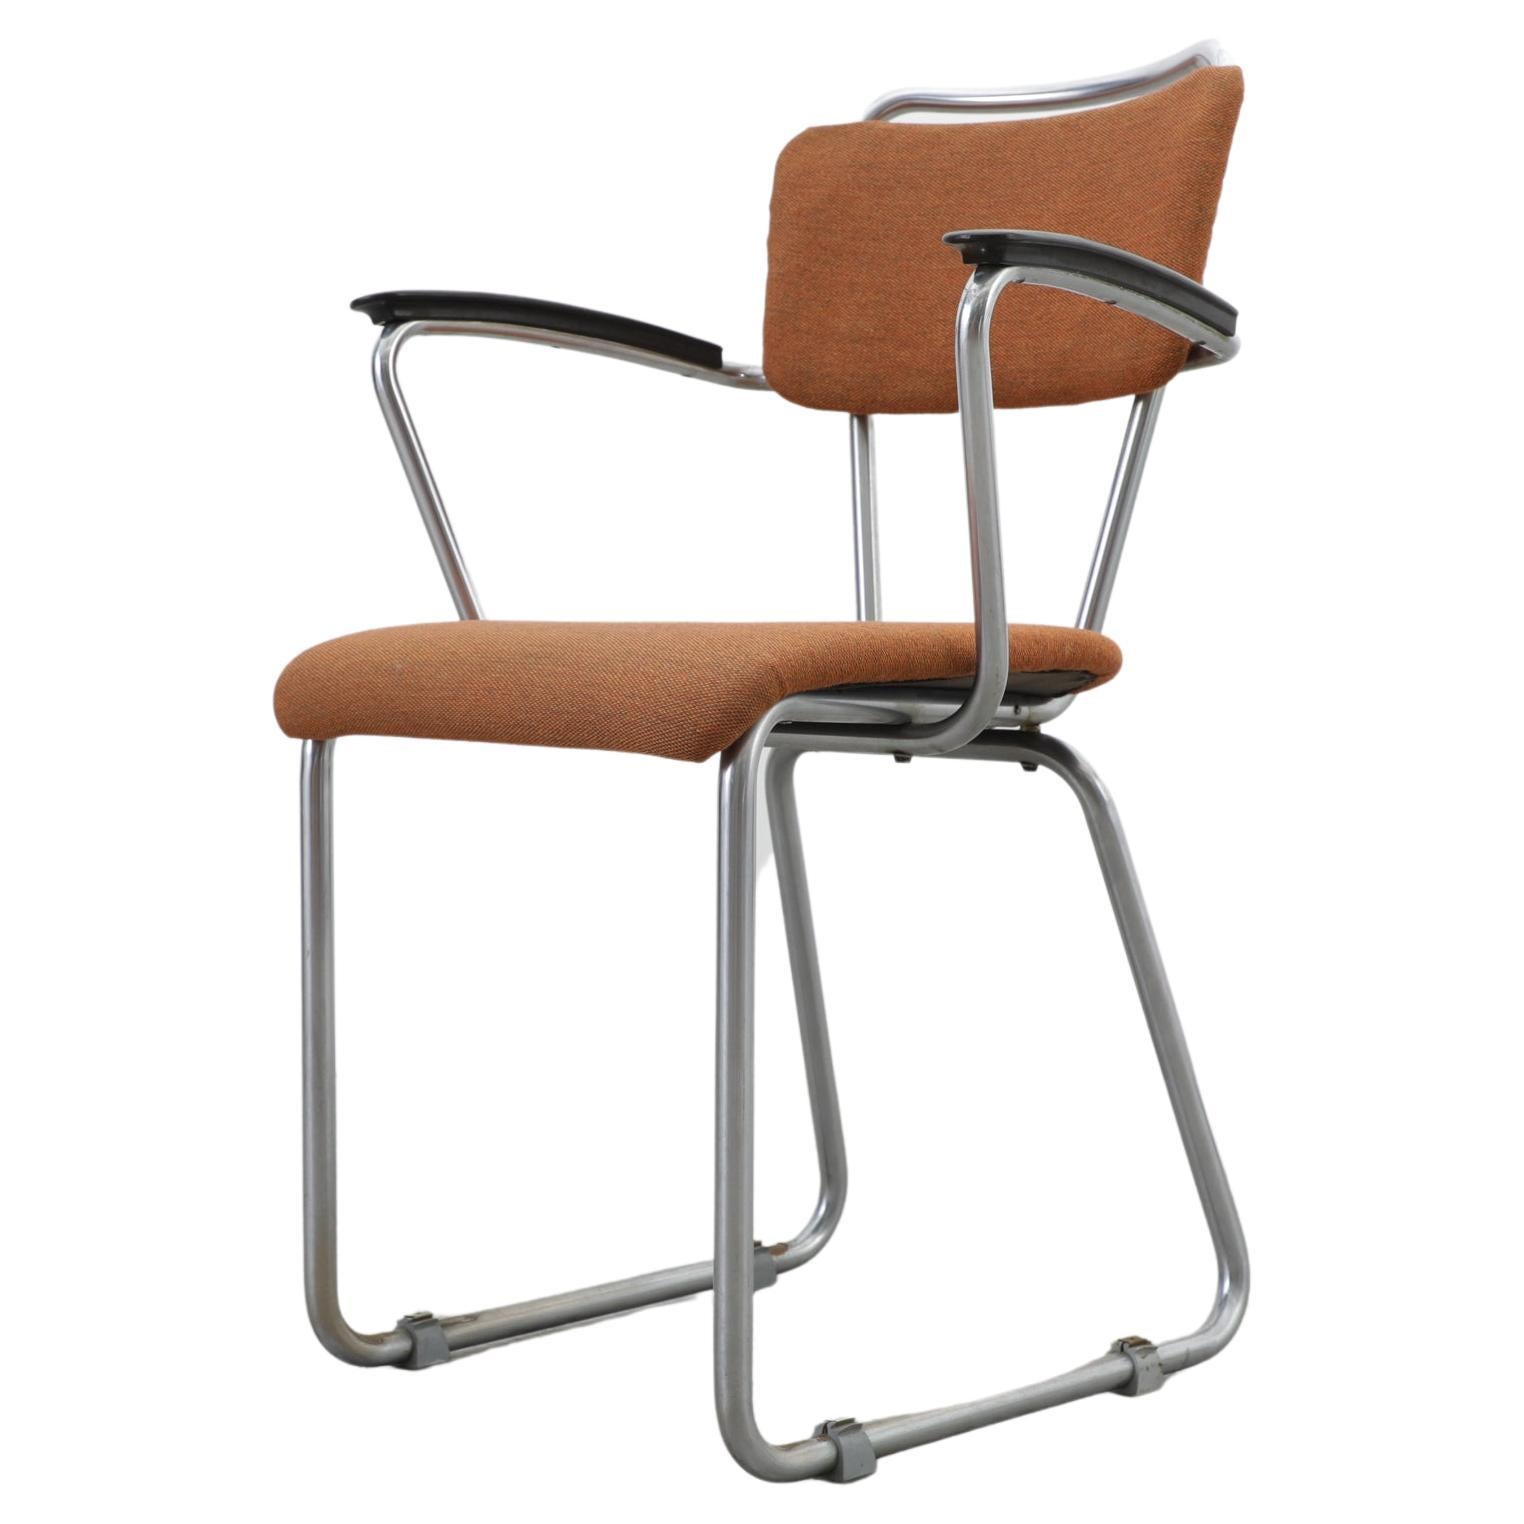 Early Edition Bauhaus Style Tubular Armchair by Gispen For Sale at 1stDibs